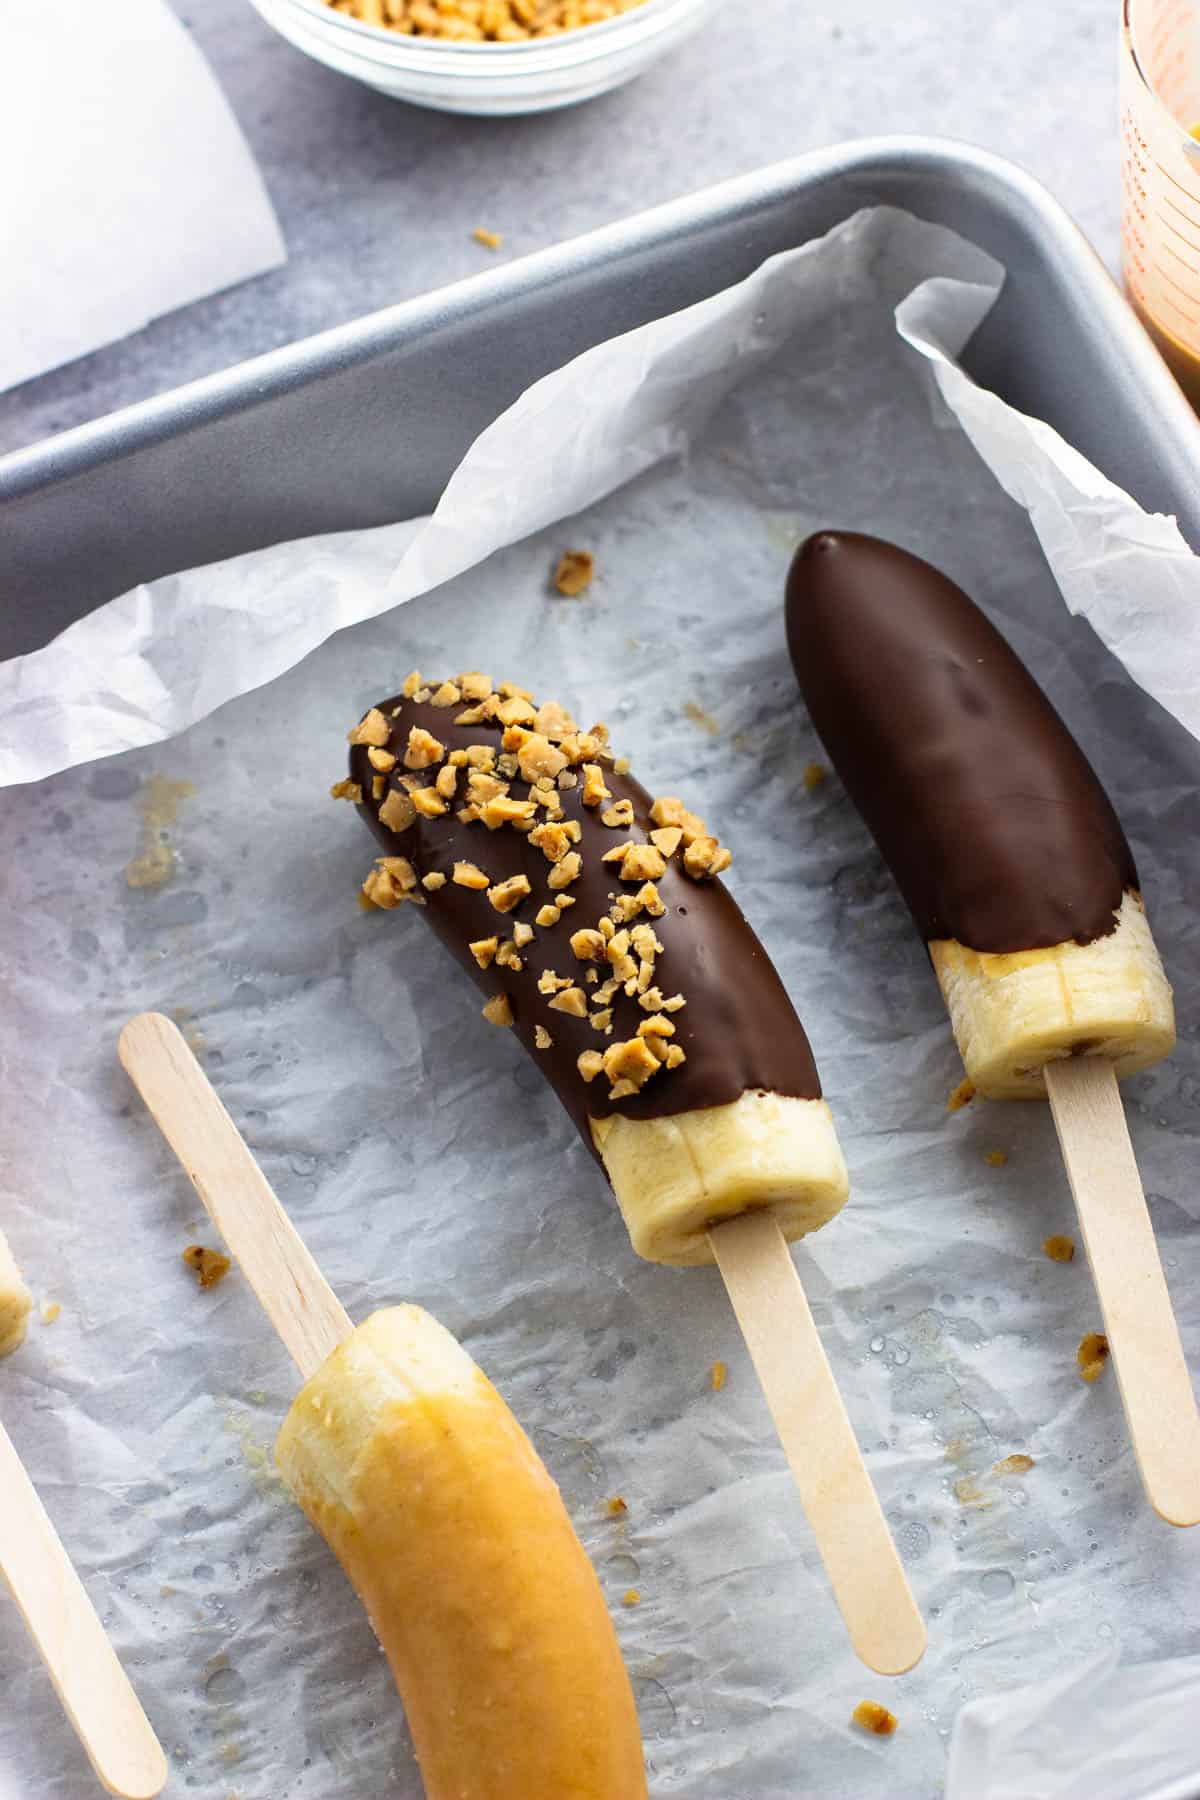 Frozen chocolate banana popsicles in a dish with one coated in chopped peanuts.